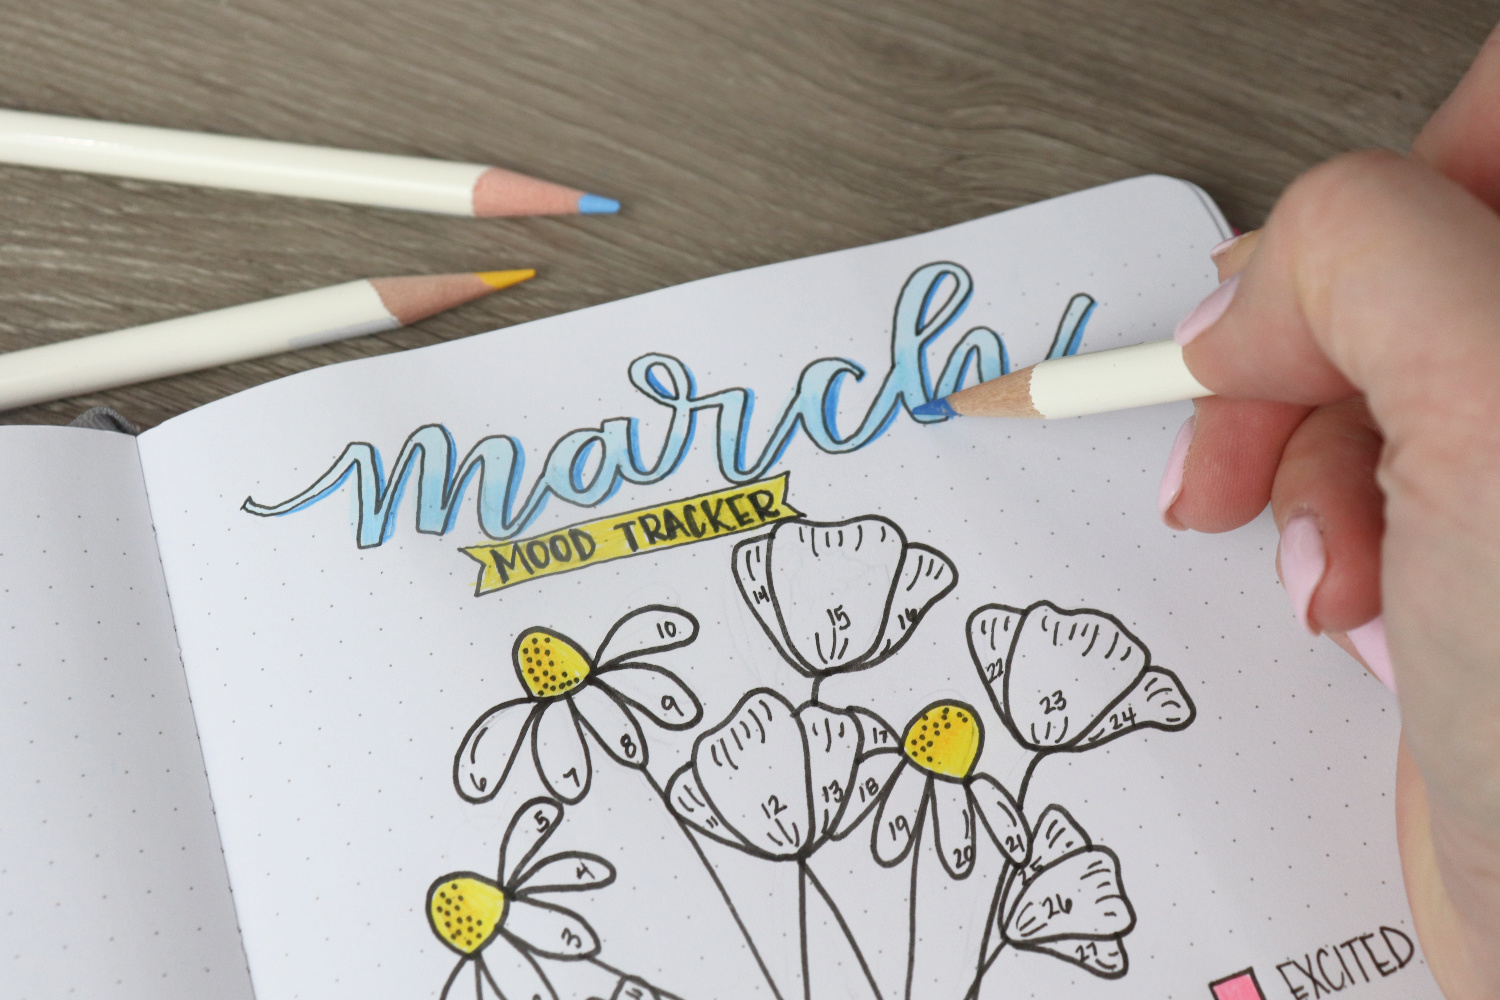 Image contains an open sketchbook with a floral mood tracker drawn in the center of the page. The word “March” is hand lettered across the top and Amy’s hand holds a blue colored pencil to add shading to the word. Two other Irojiten colored pencils sit on the wooden desk near the sketchbook.